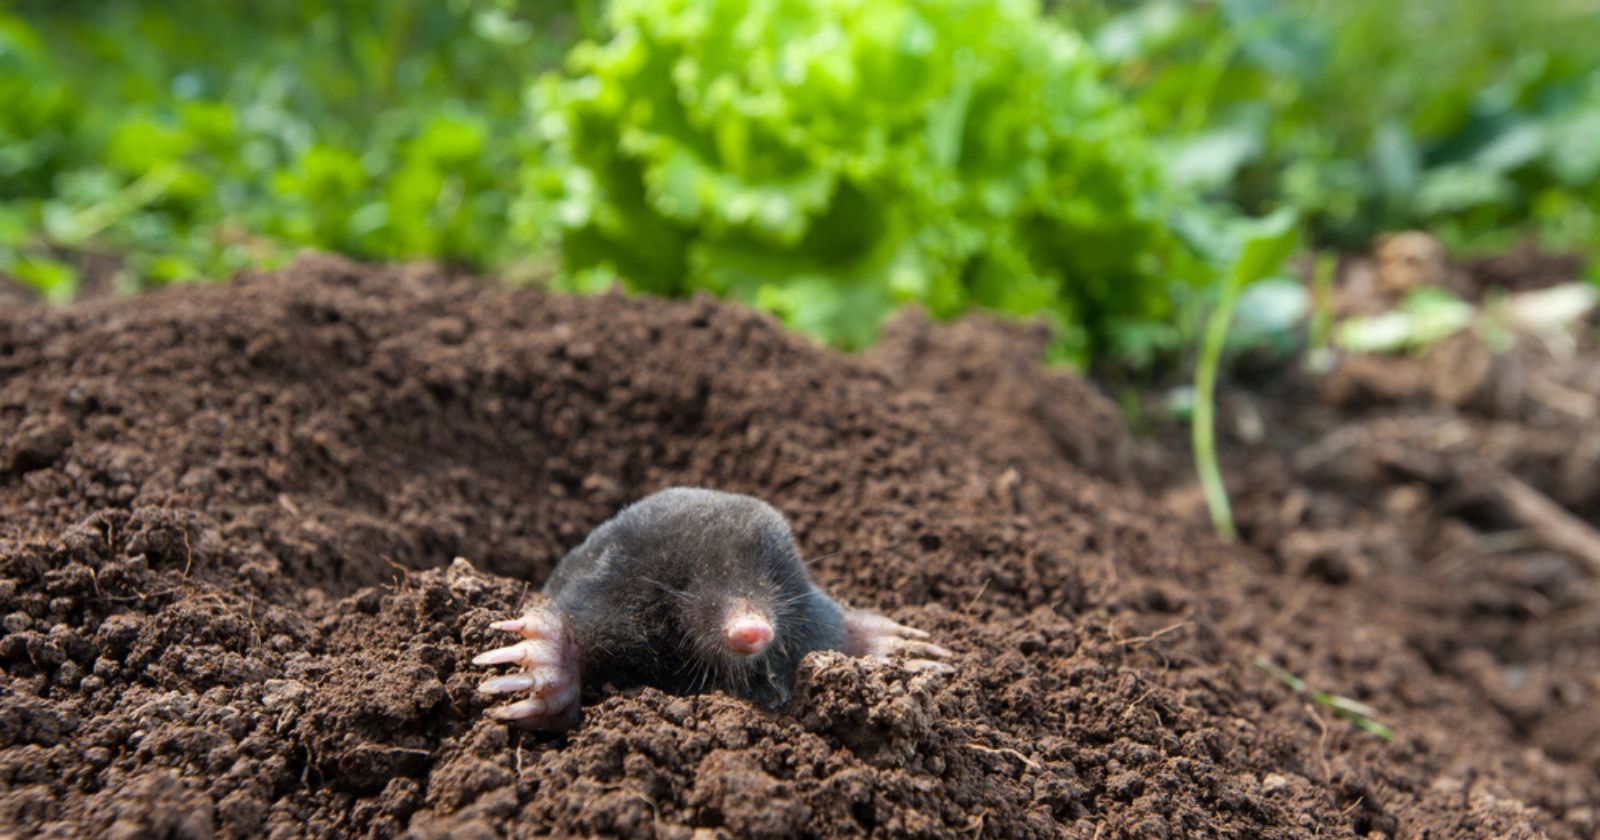 Garden: how to keep the mole away without endangering it?